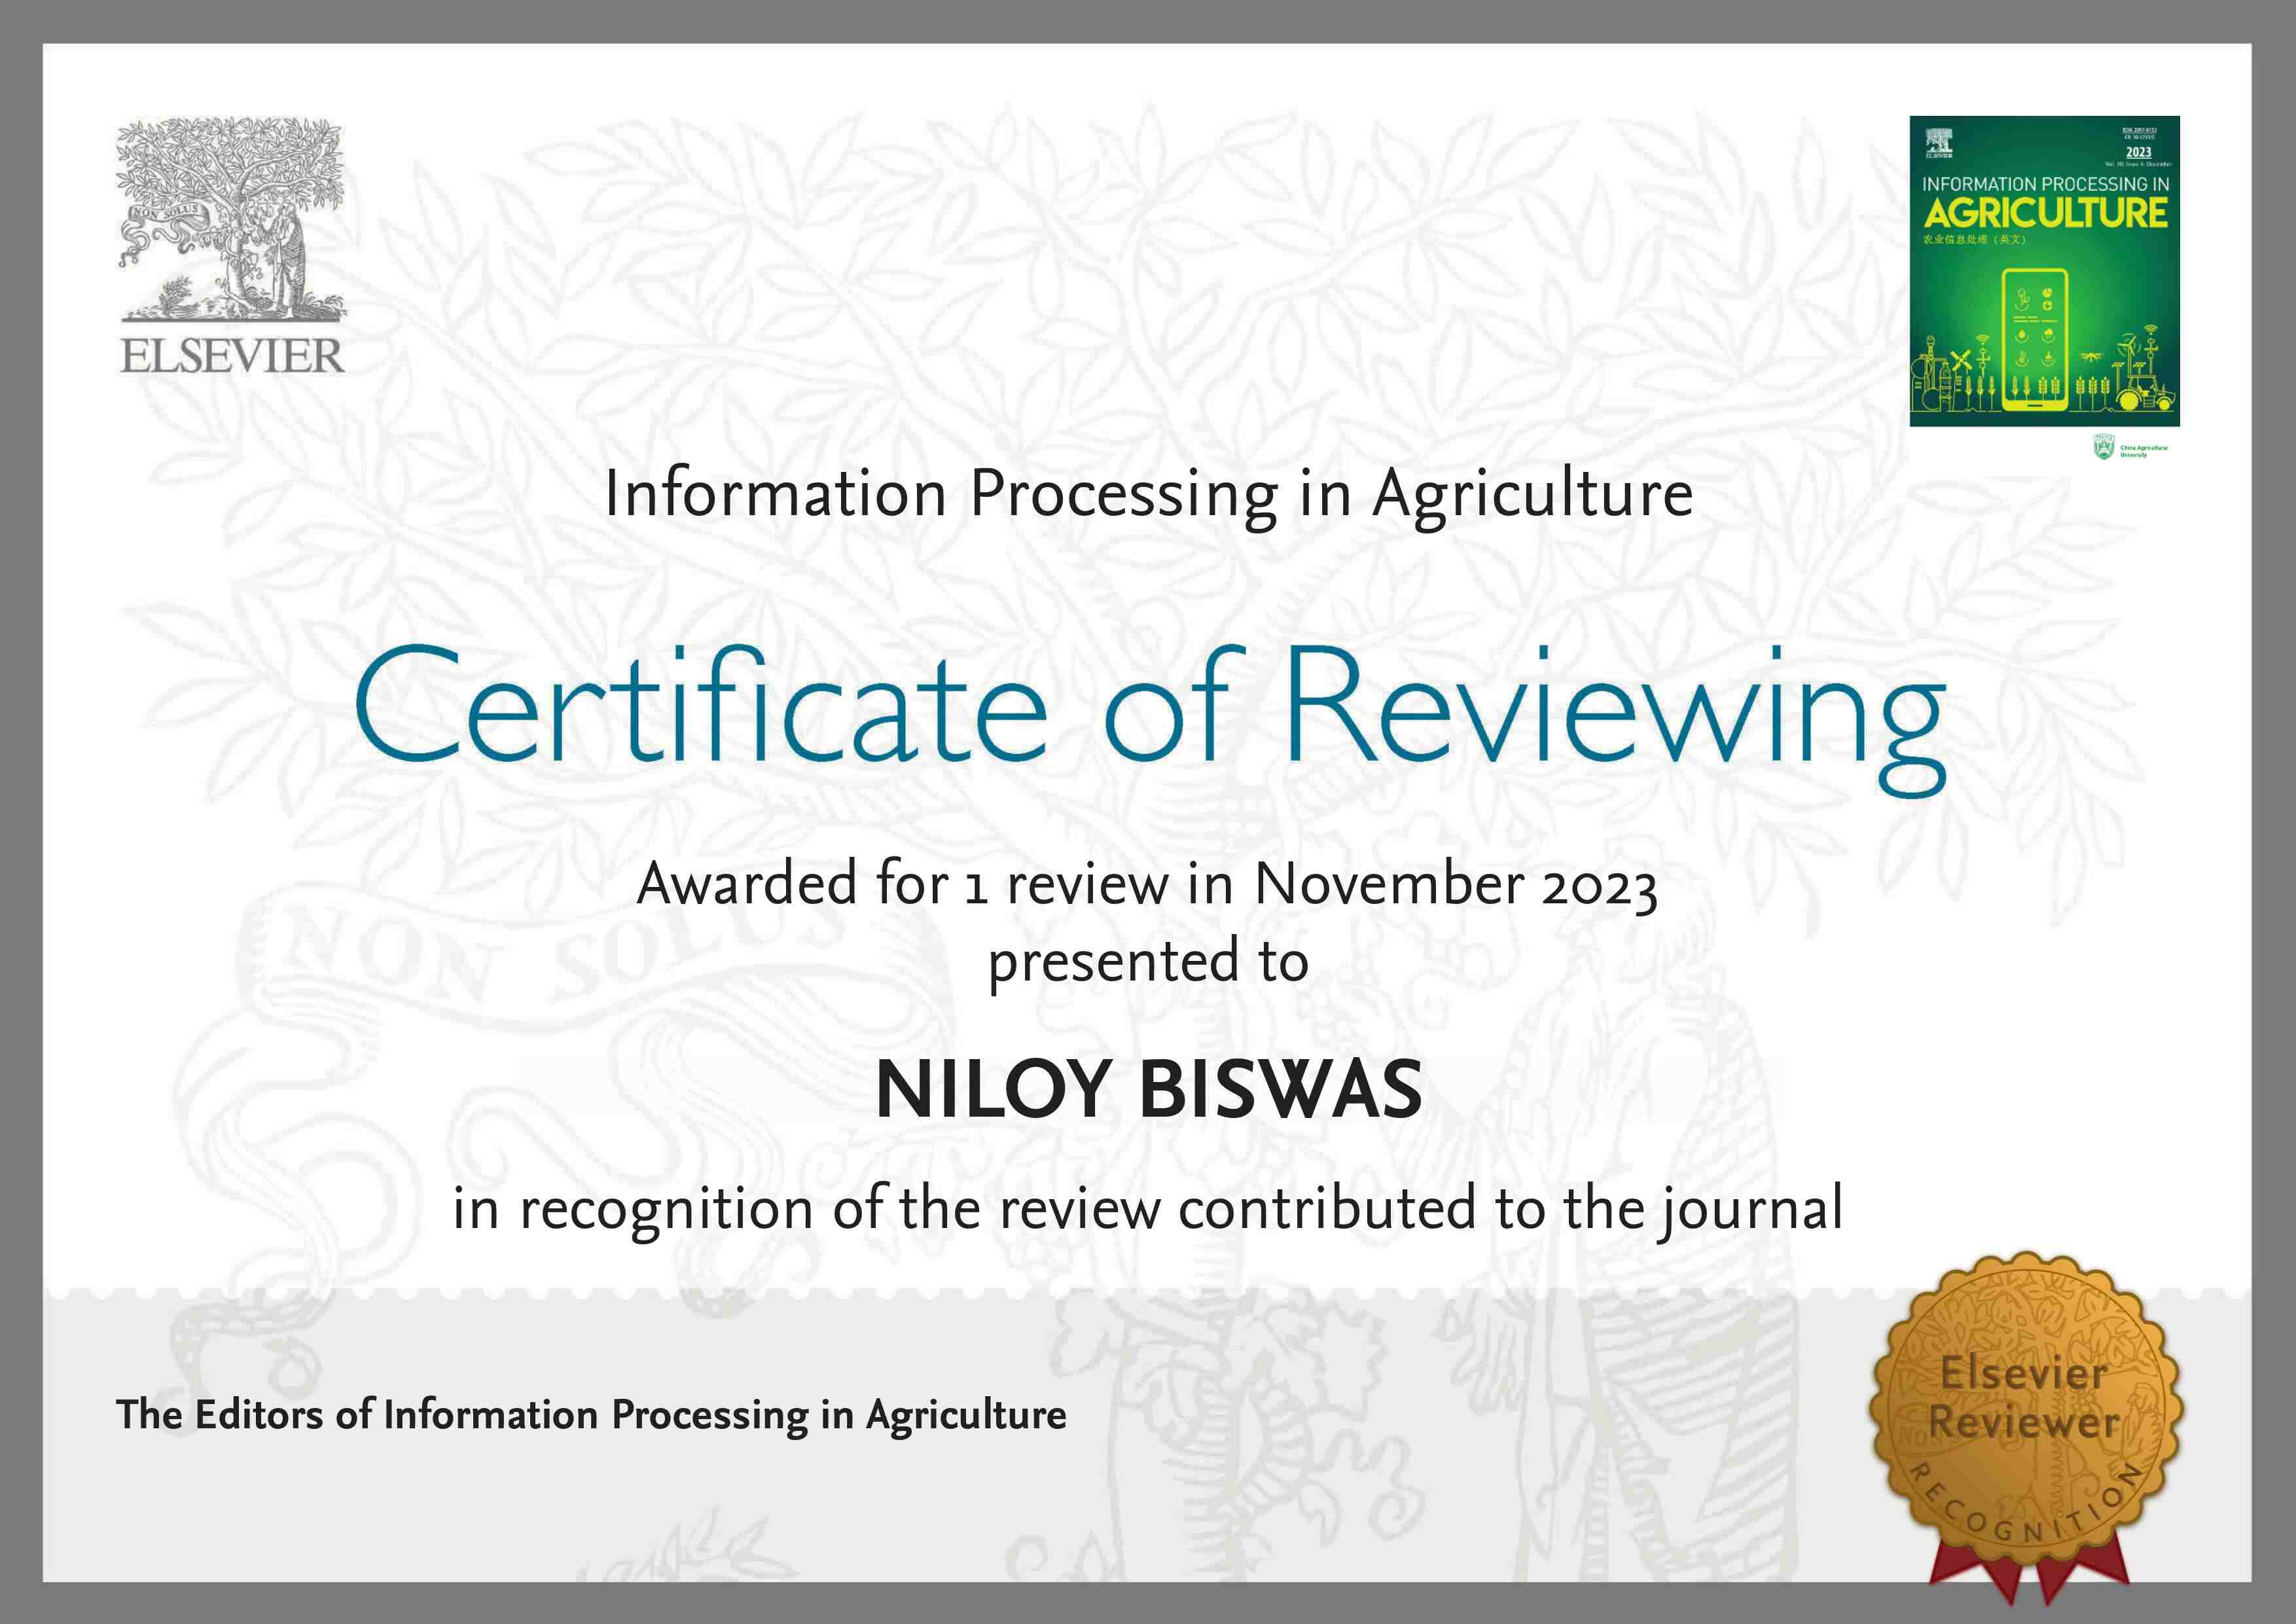 Niloy Biswas - Elsevier Information Processing in Agriculture Reviewer Certificate